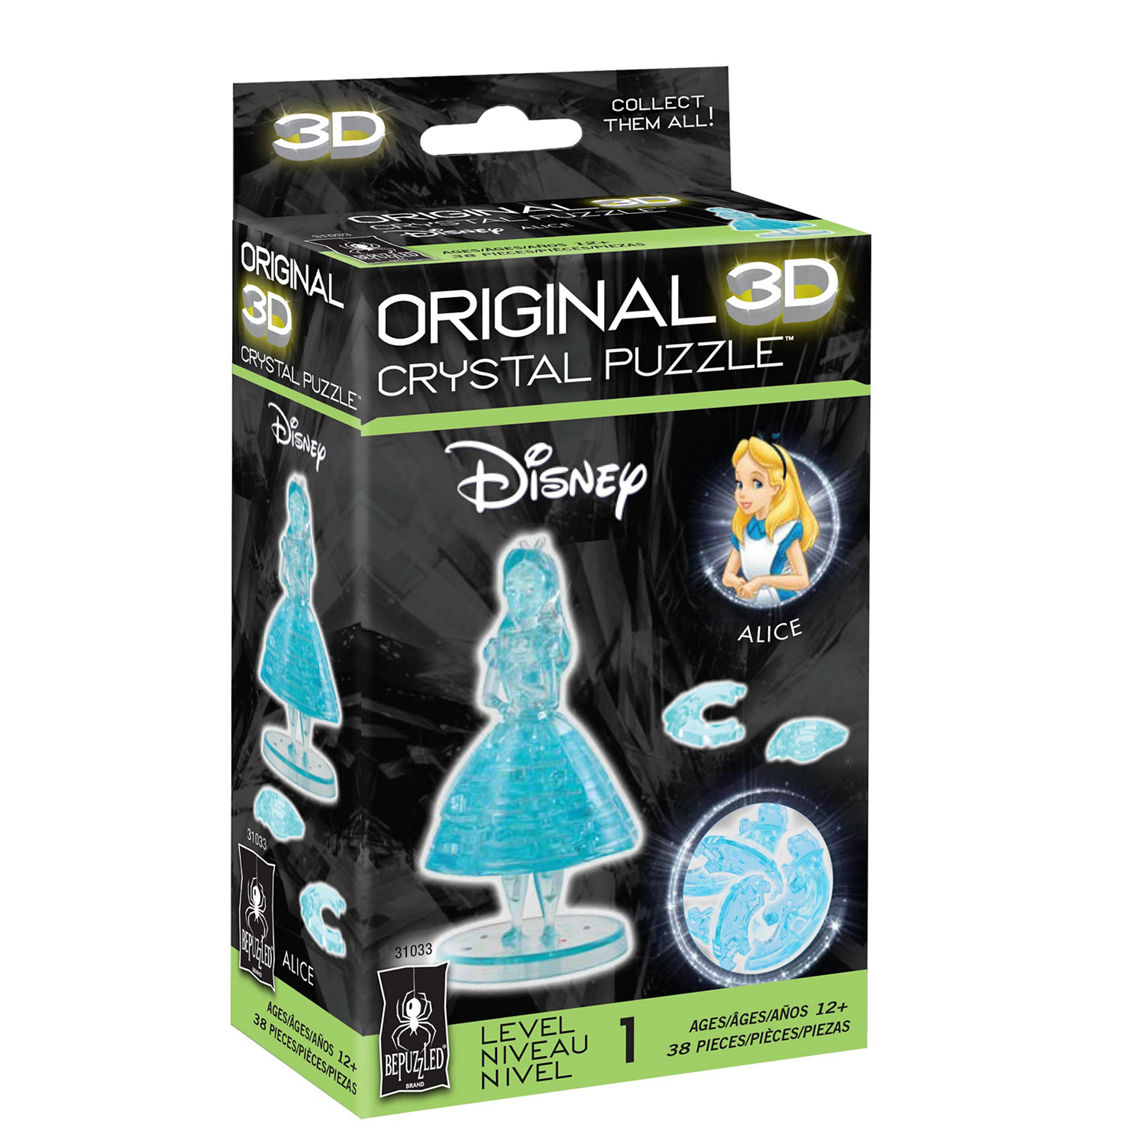 BePuzzled 3D Crystal Puzzle - Disney Alice: 38 Pcs - Image 2 of 2